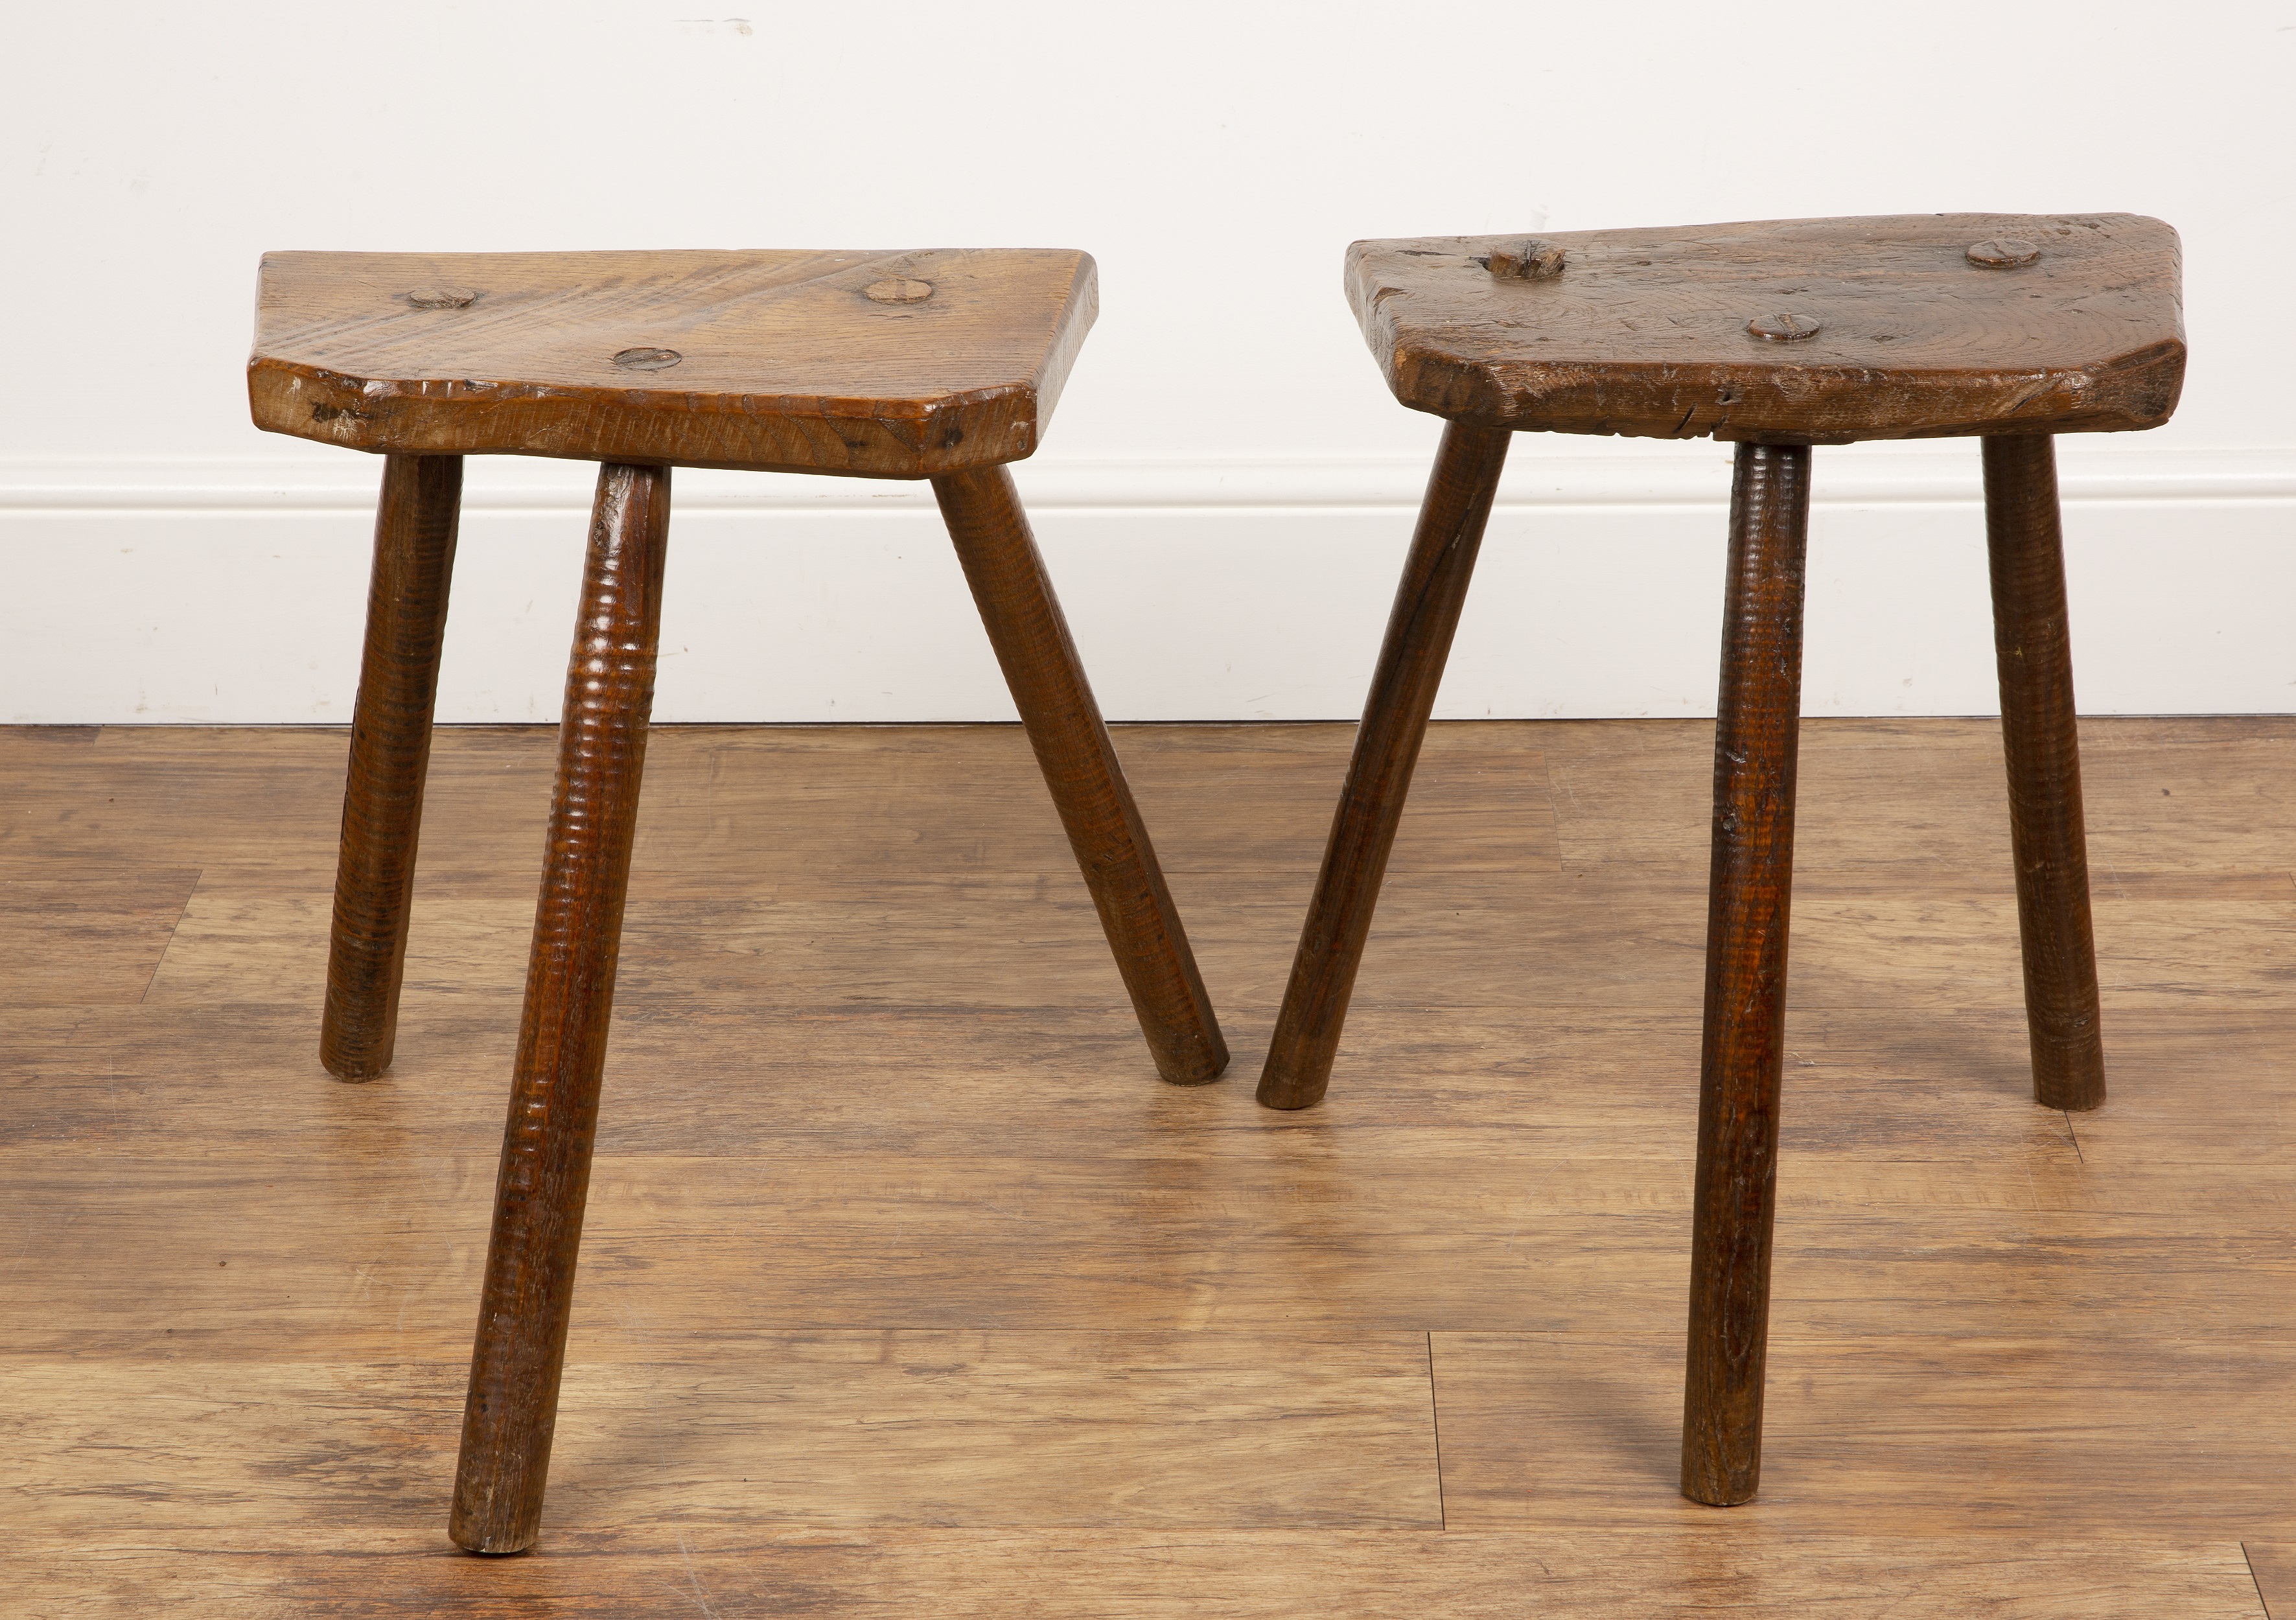 Two cutlers stools 19th Century, with elm tops, each on three legs, lighter coloured example is 50cm - Image 5 of 5